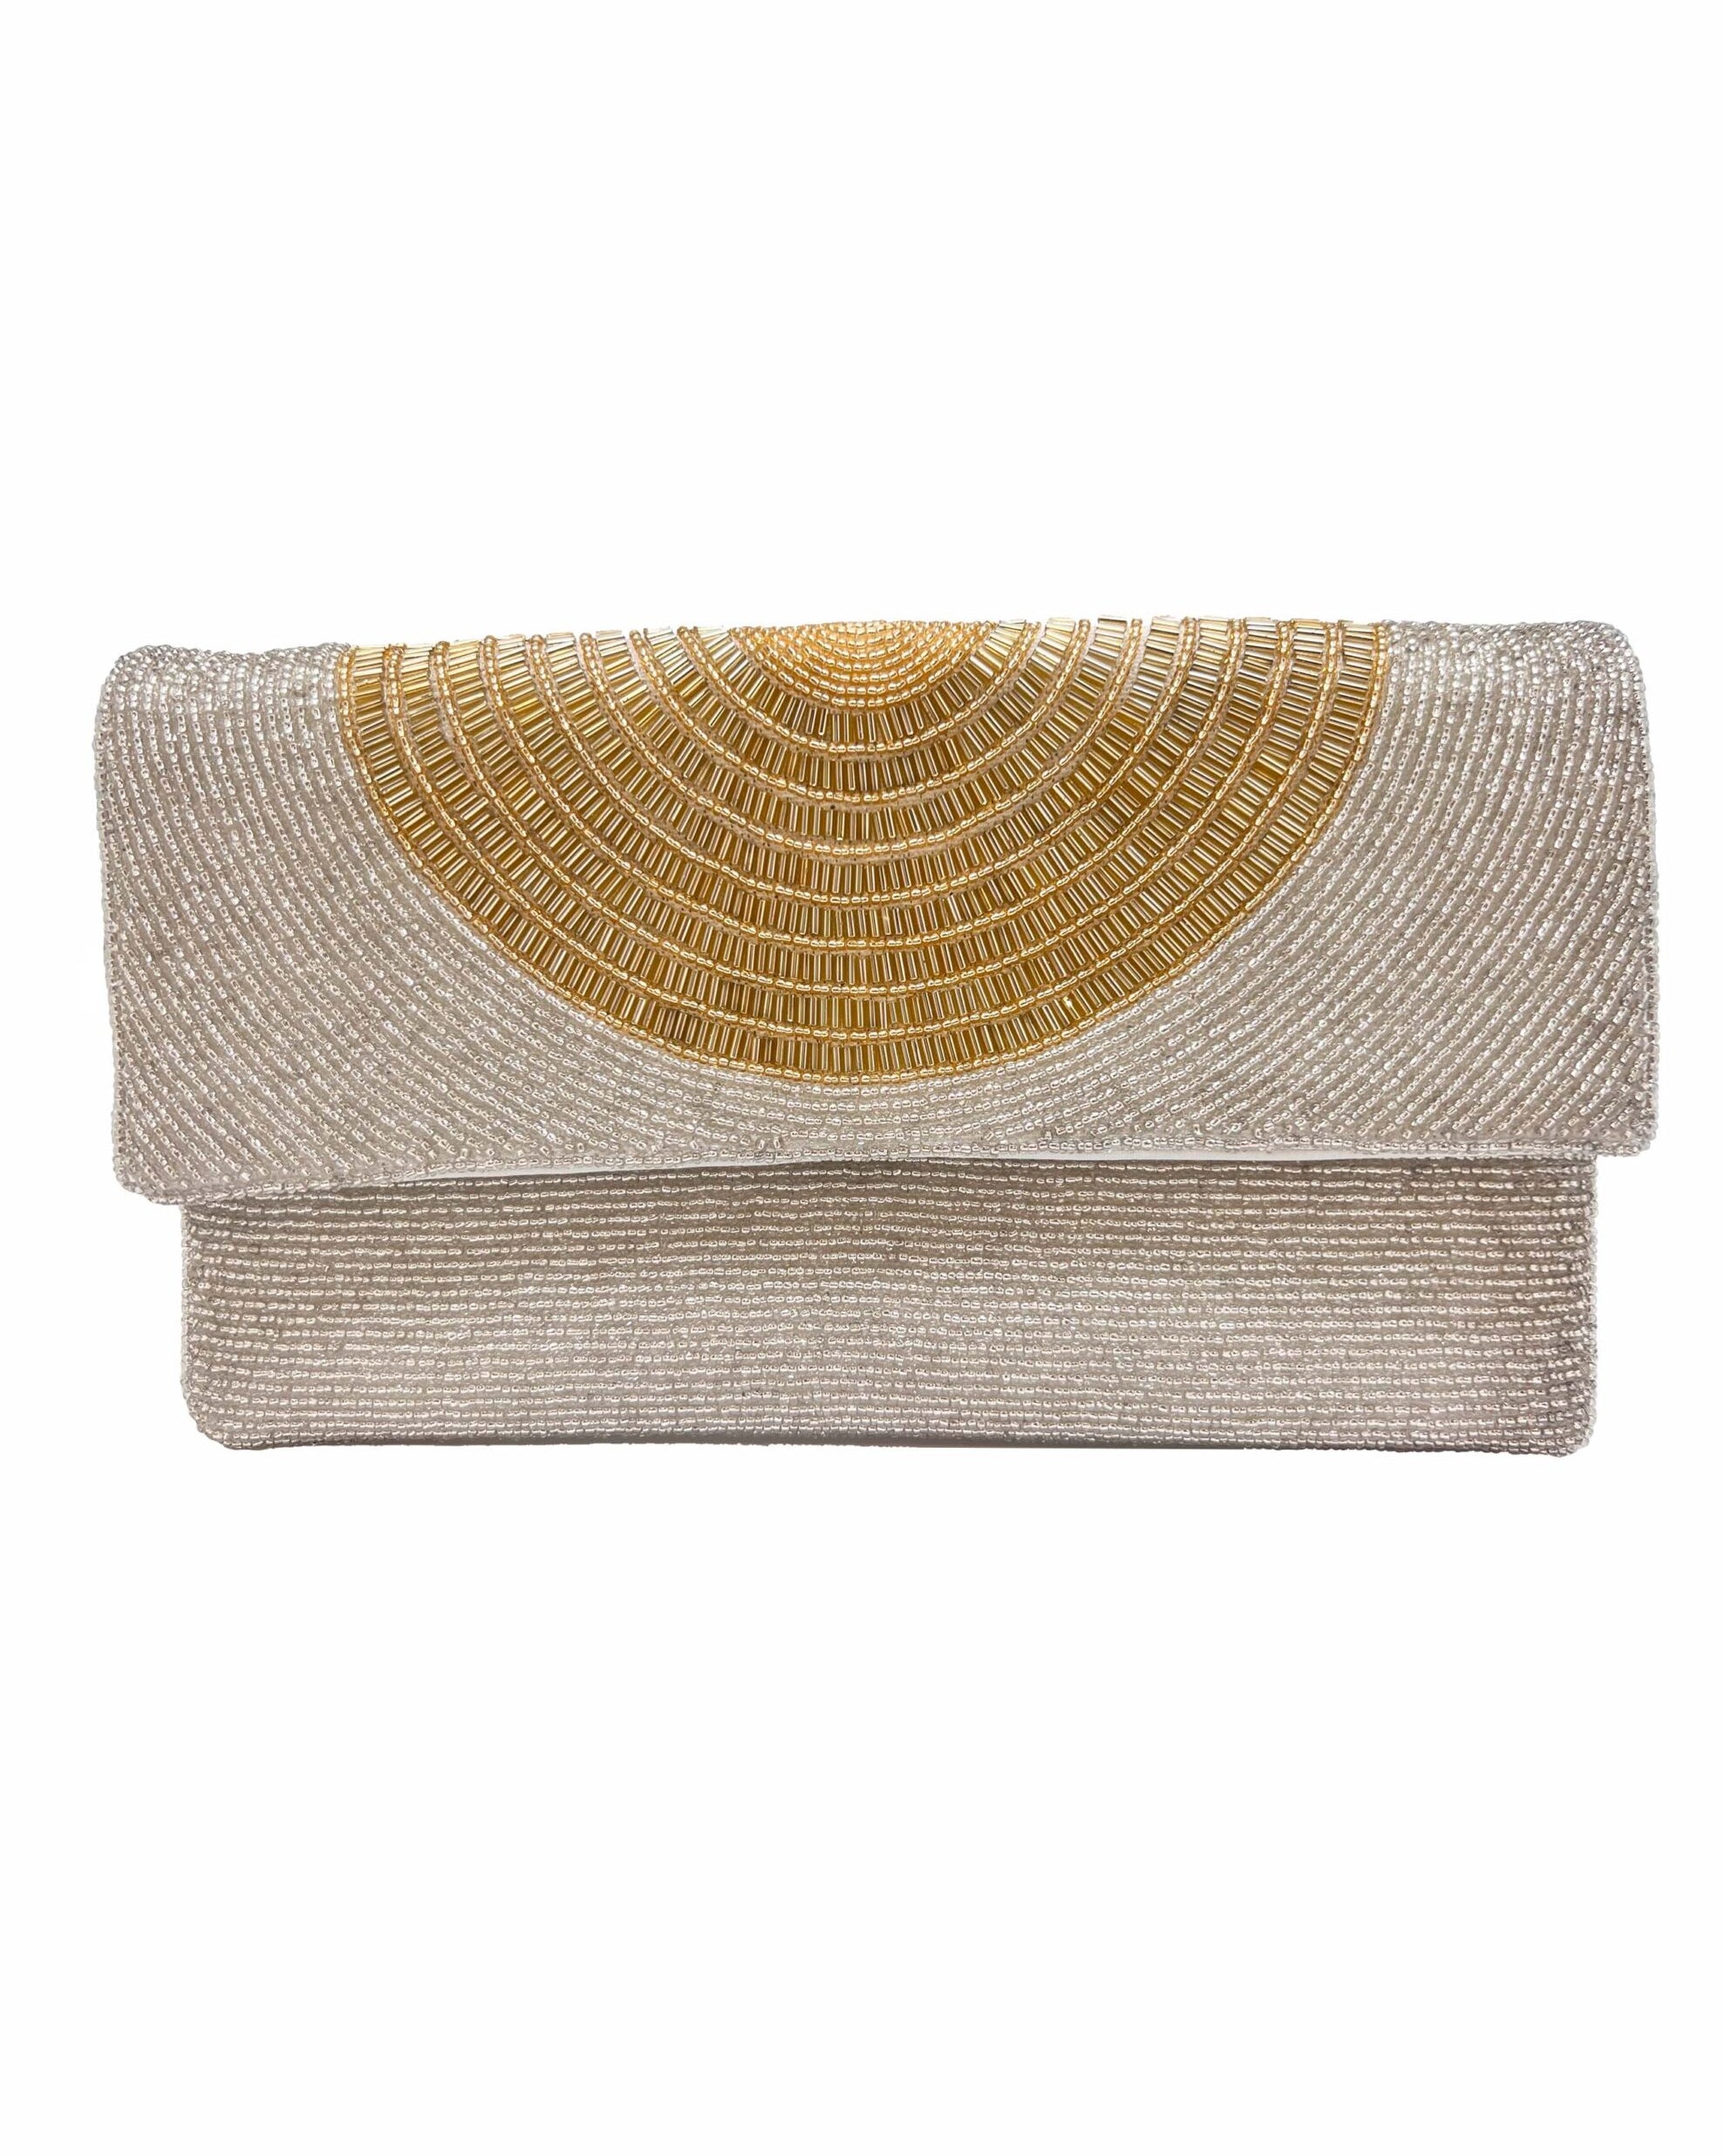 Silver & Gold Beaded Clutch.